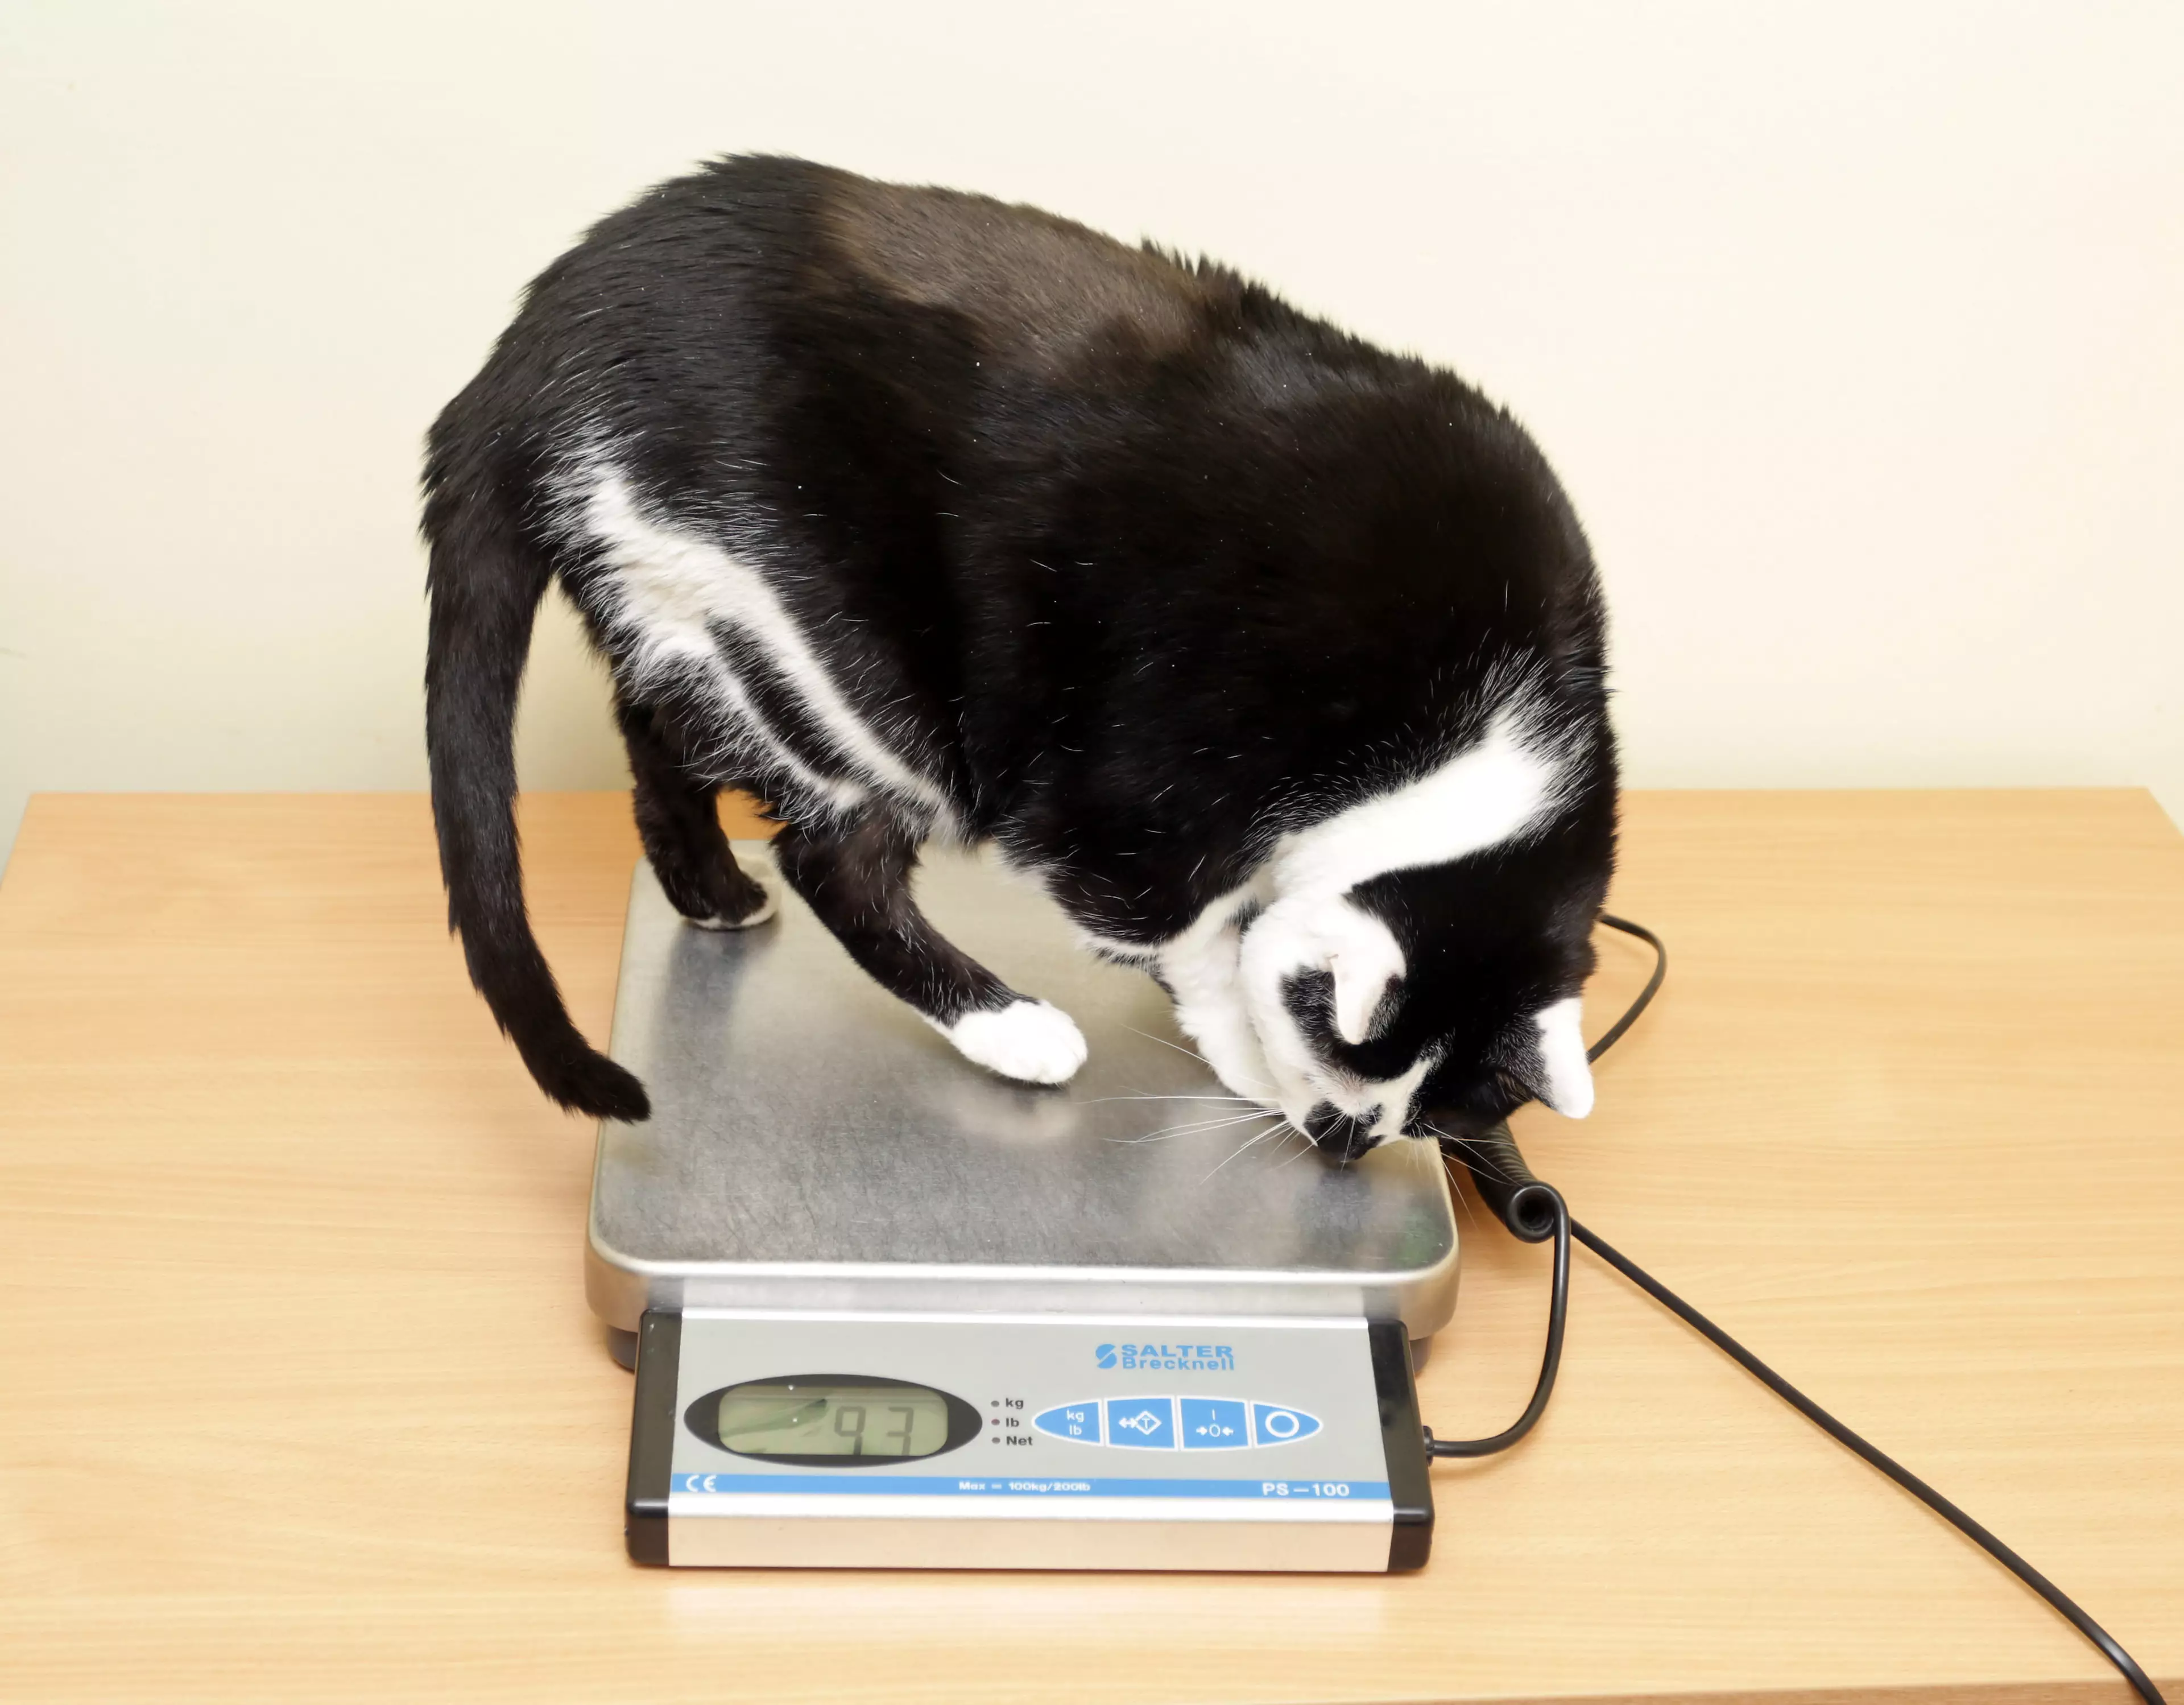 Paisley tipped the scales at 1st 7lbs, over double the healthy 8lbs weight for a cat. (